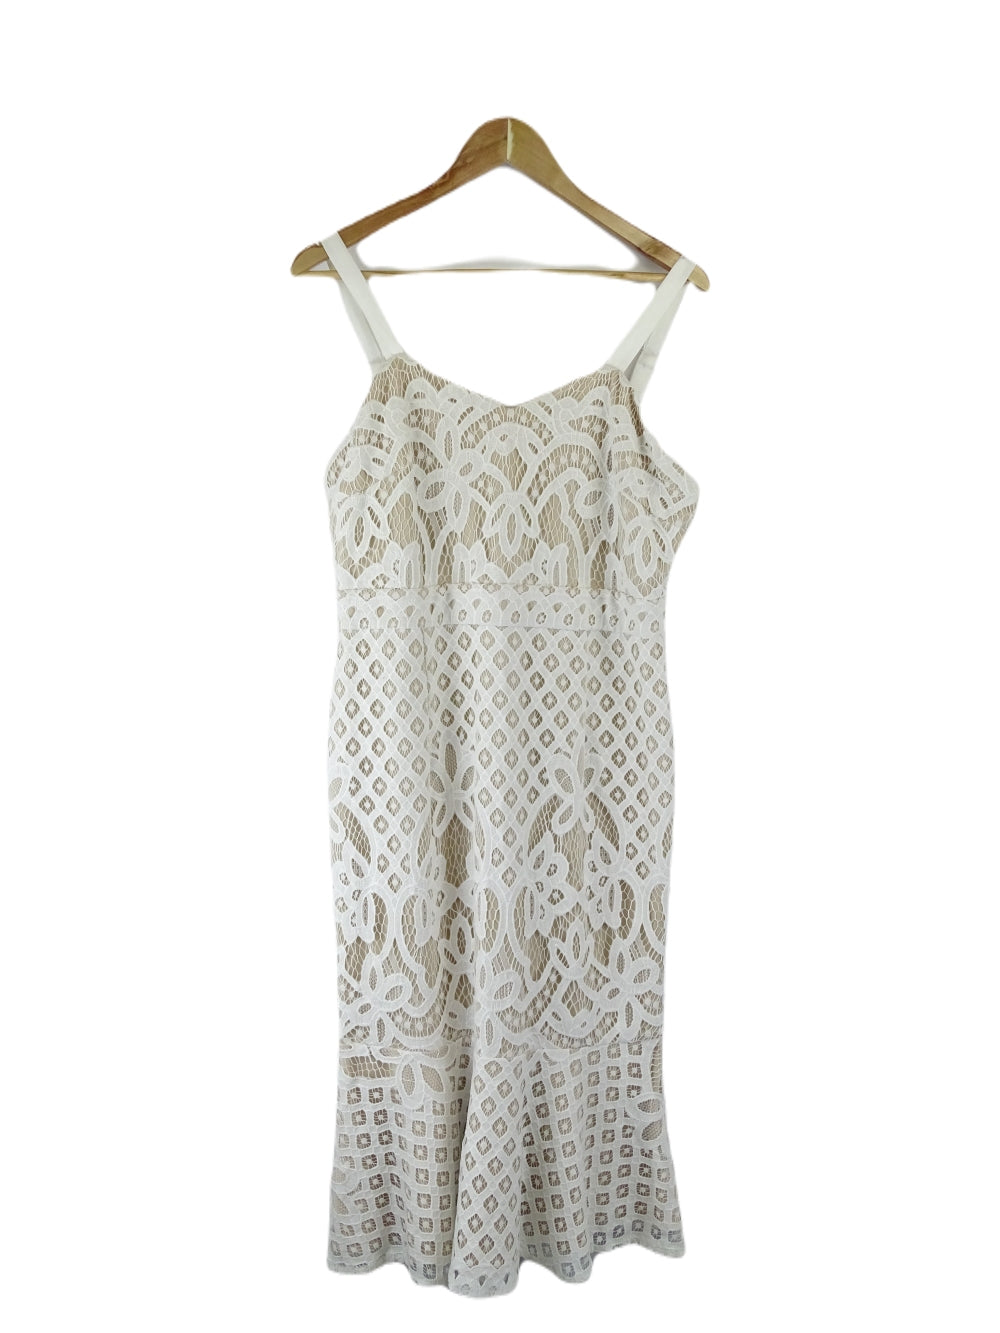 Two Sisters White Lace Dress 14